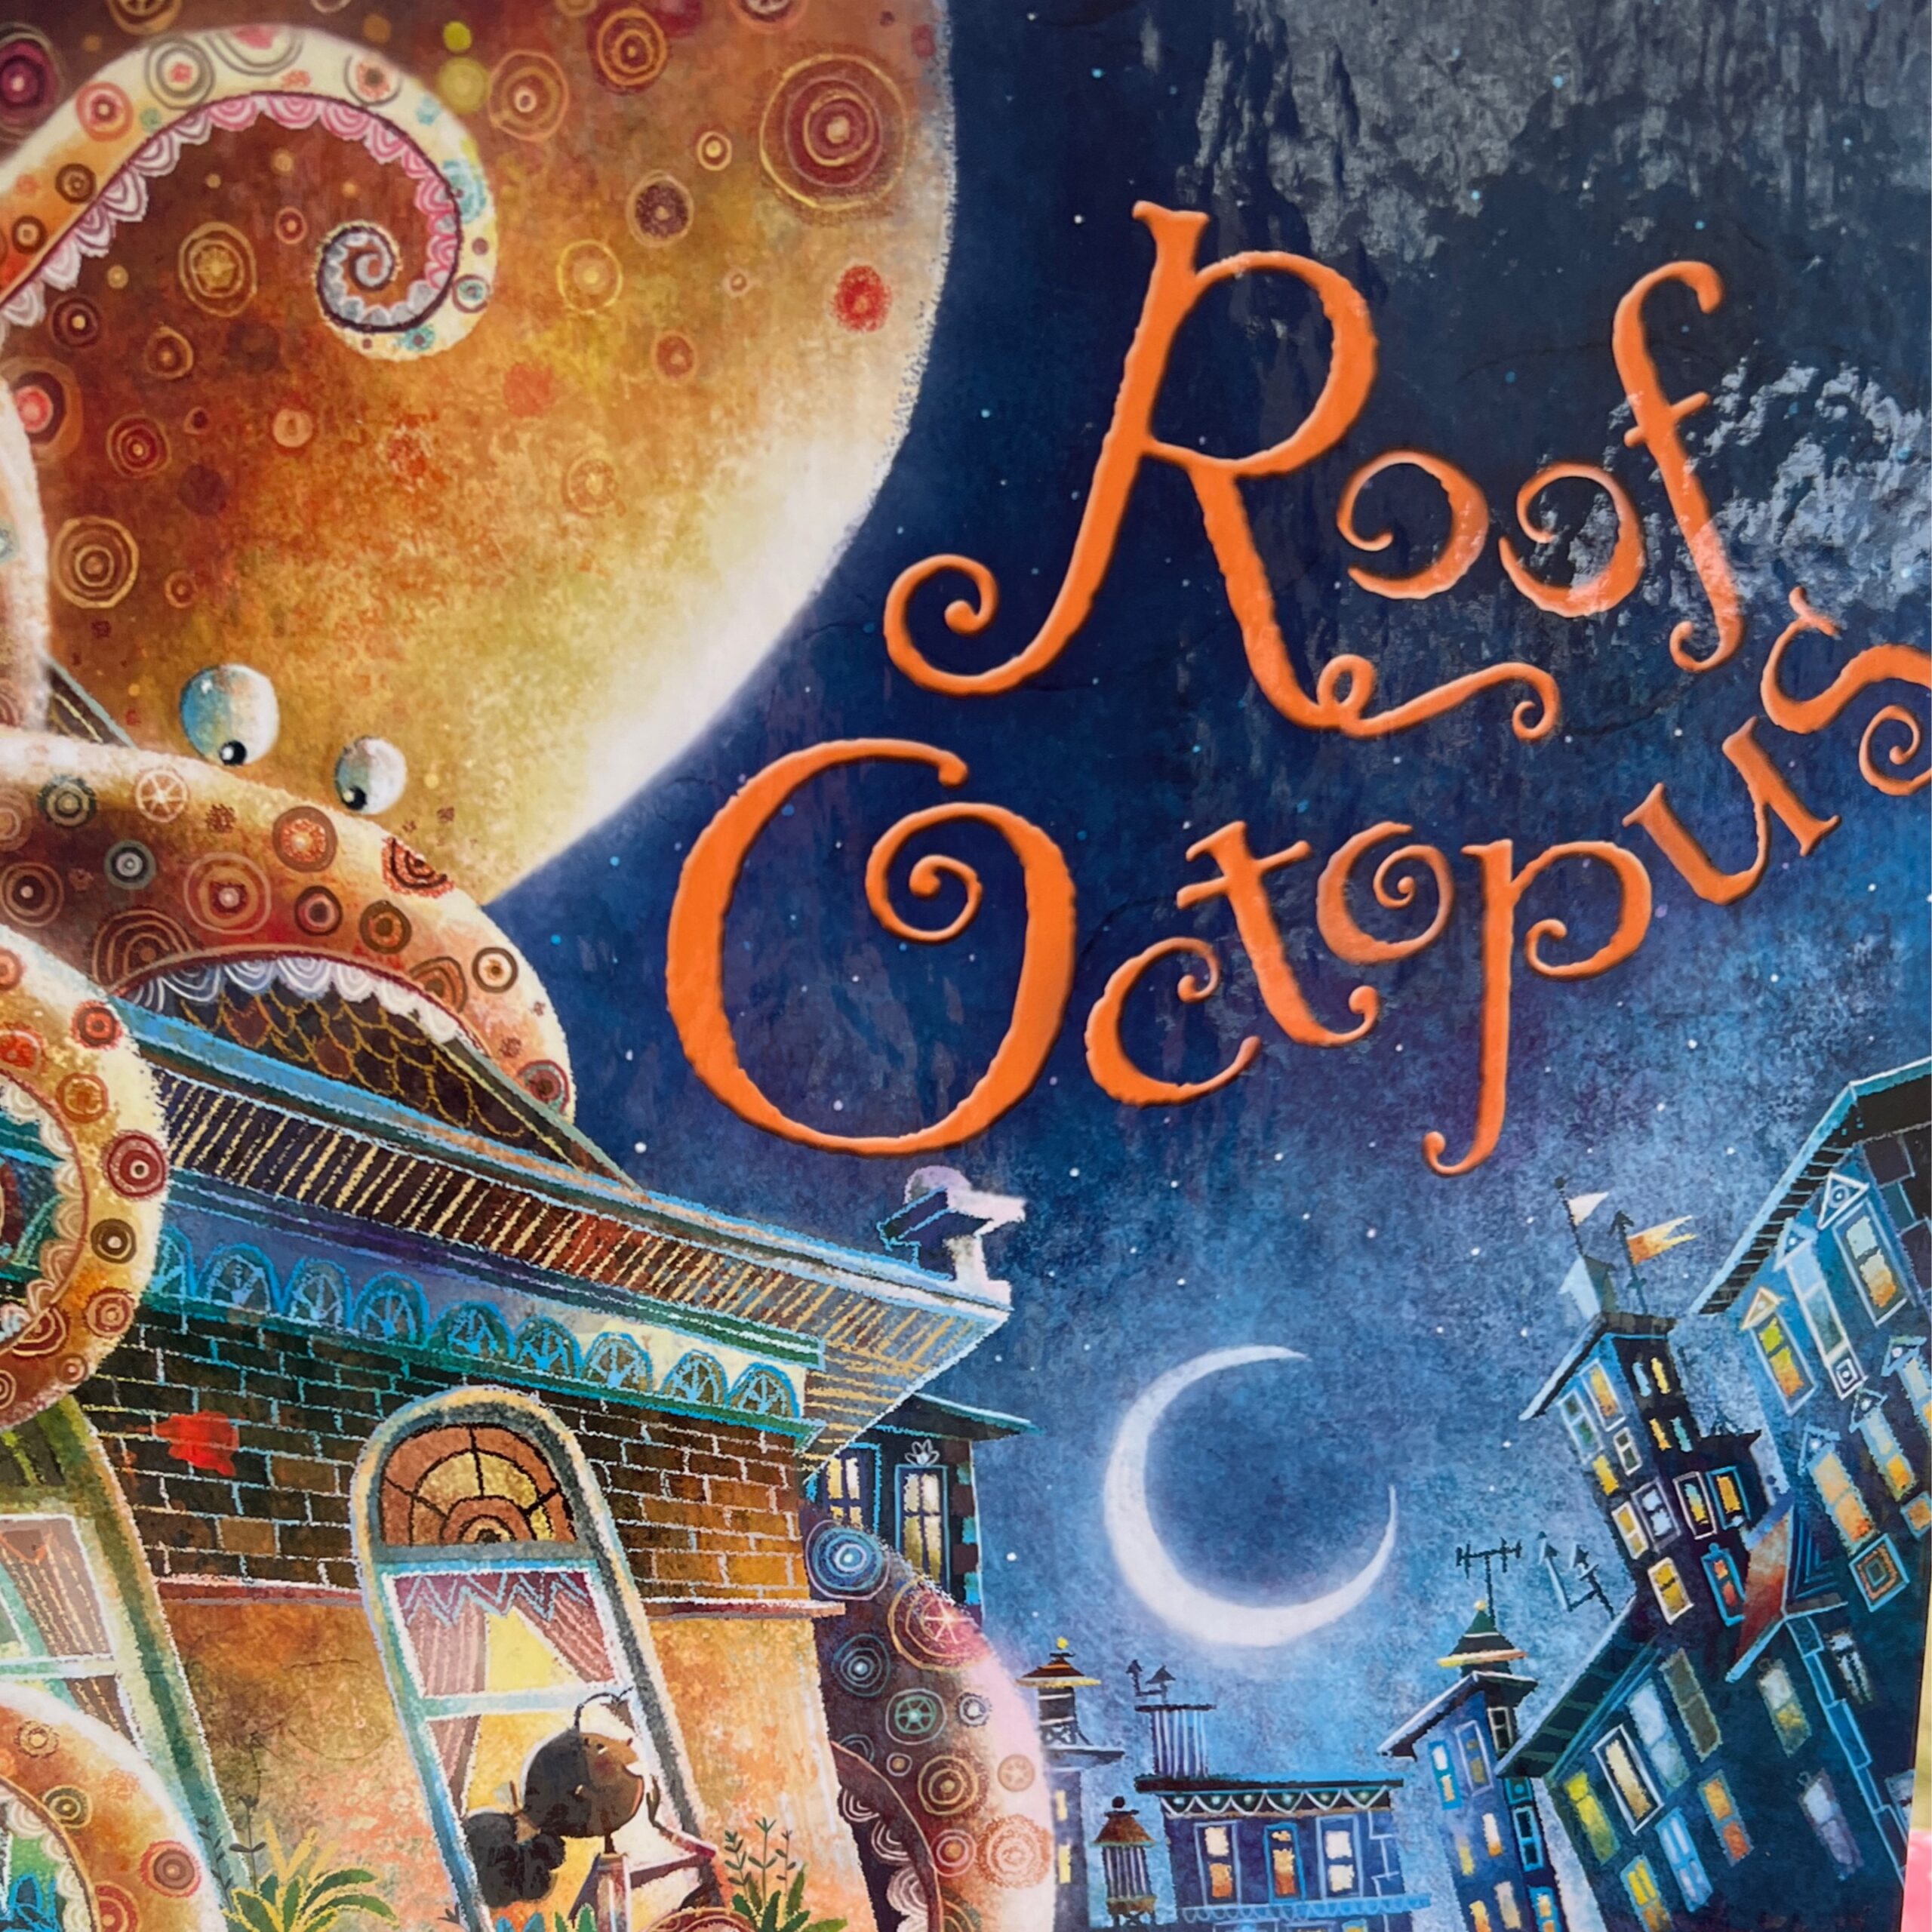 Octopus storybook with charming characters